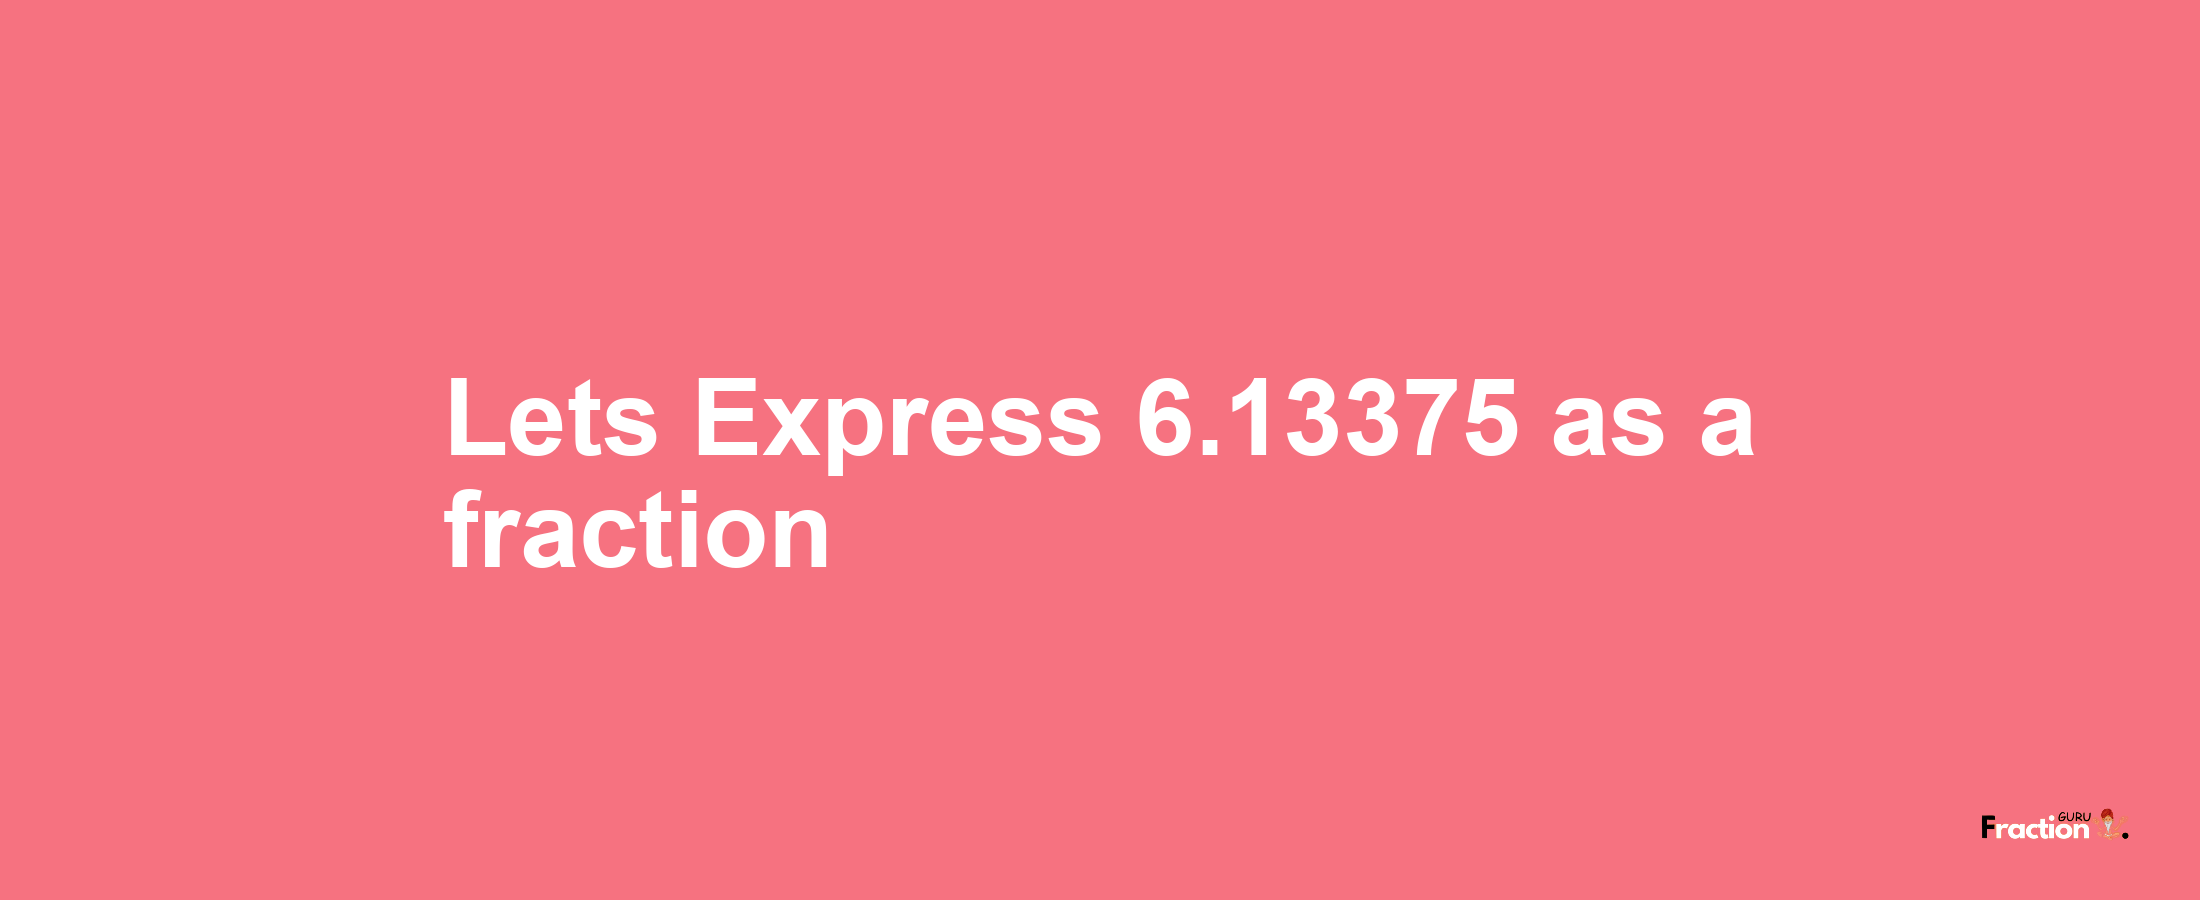 Lets Express 6.13375 as afraction